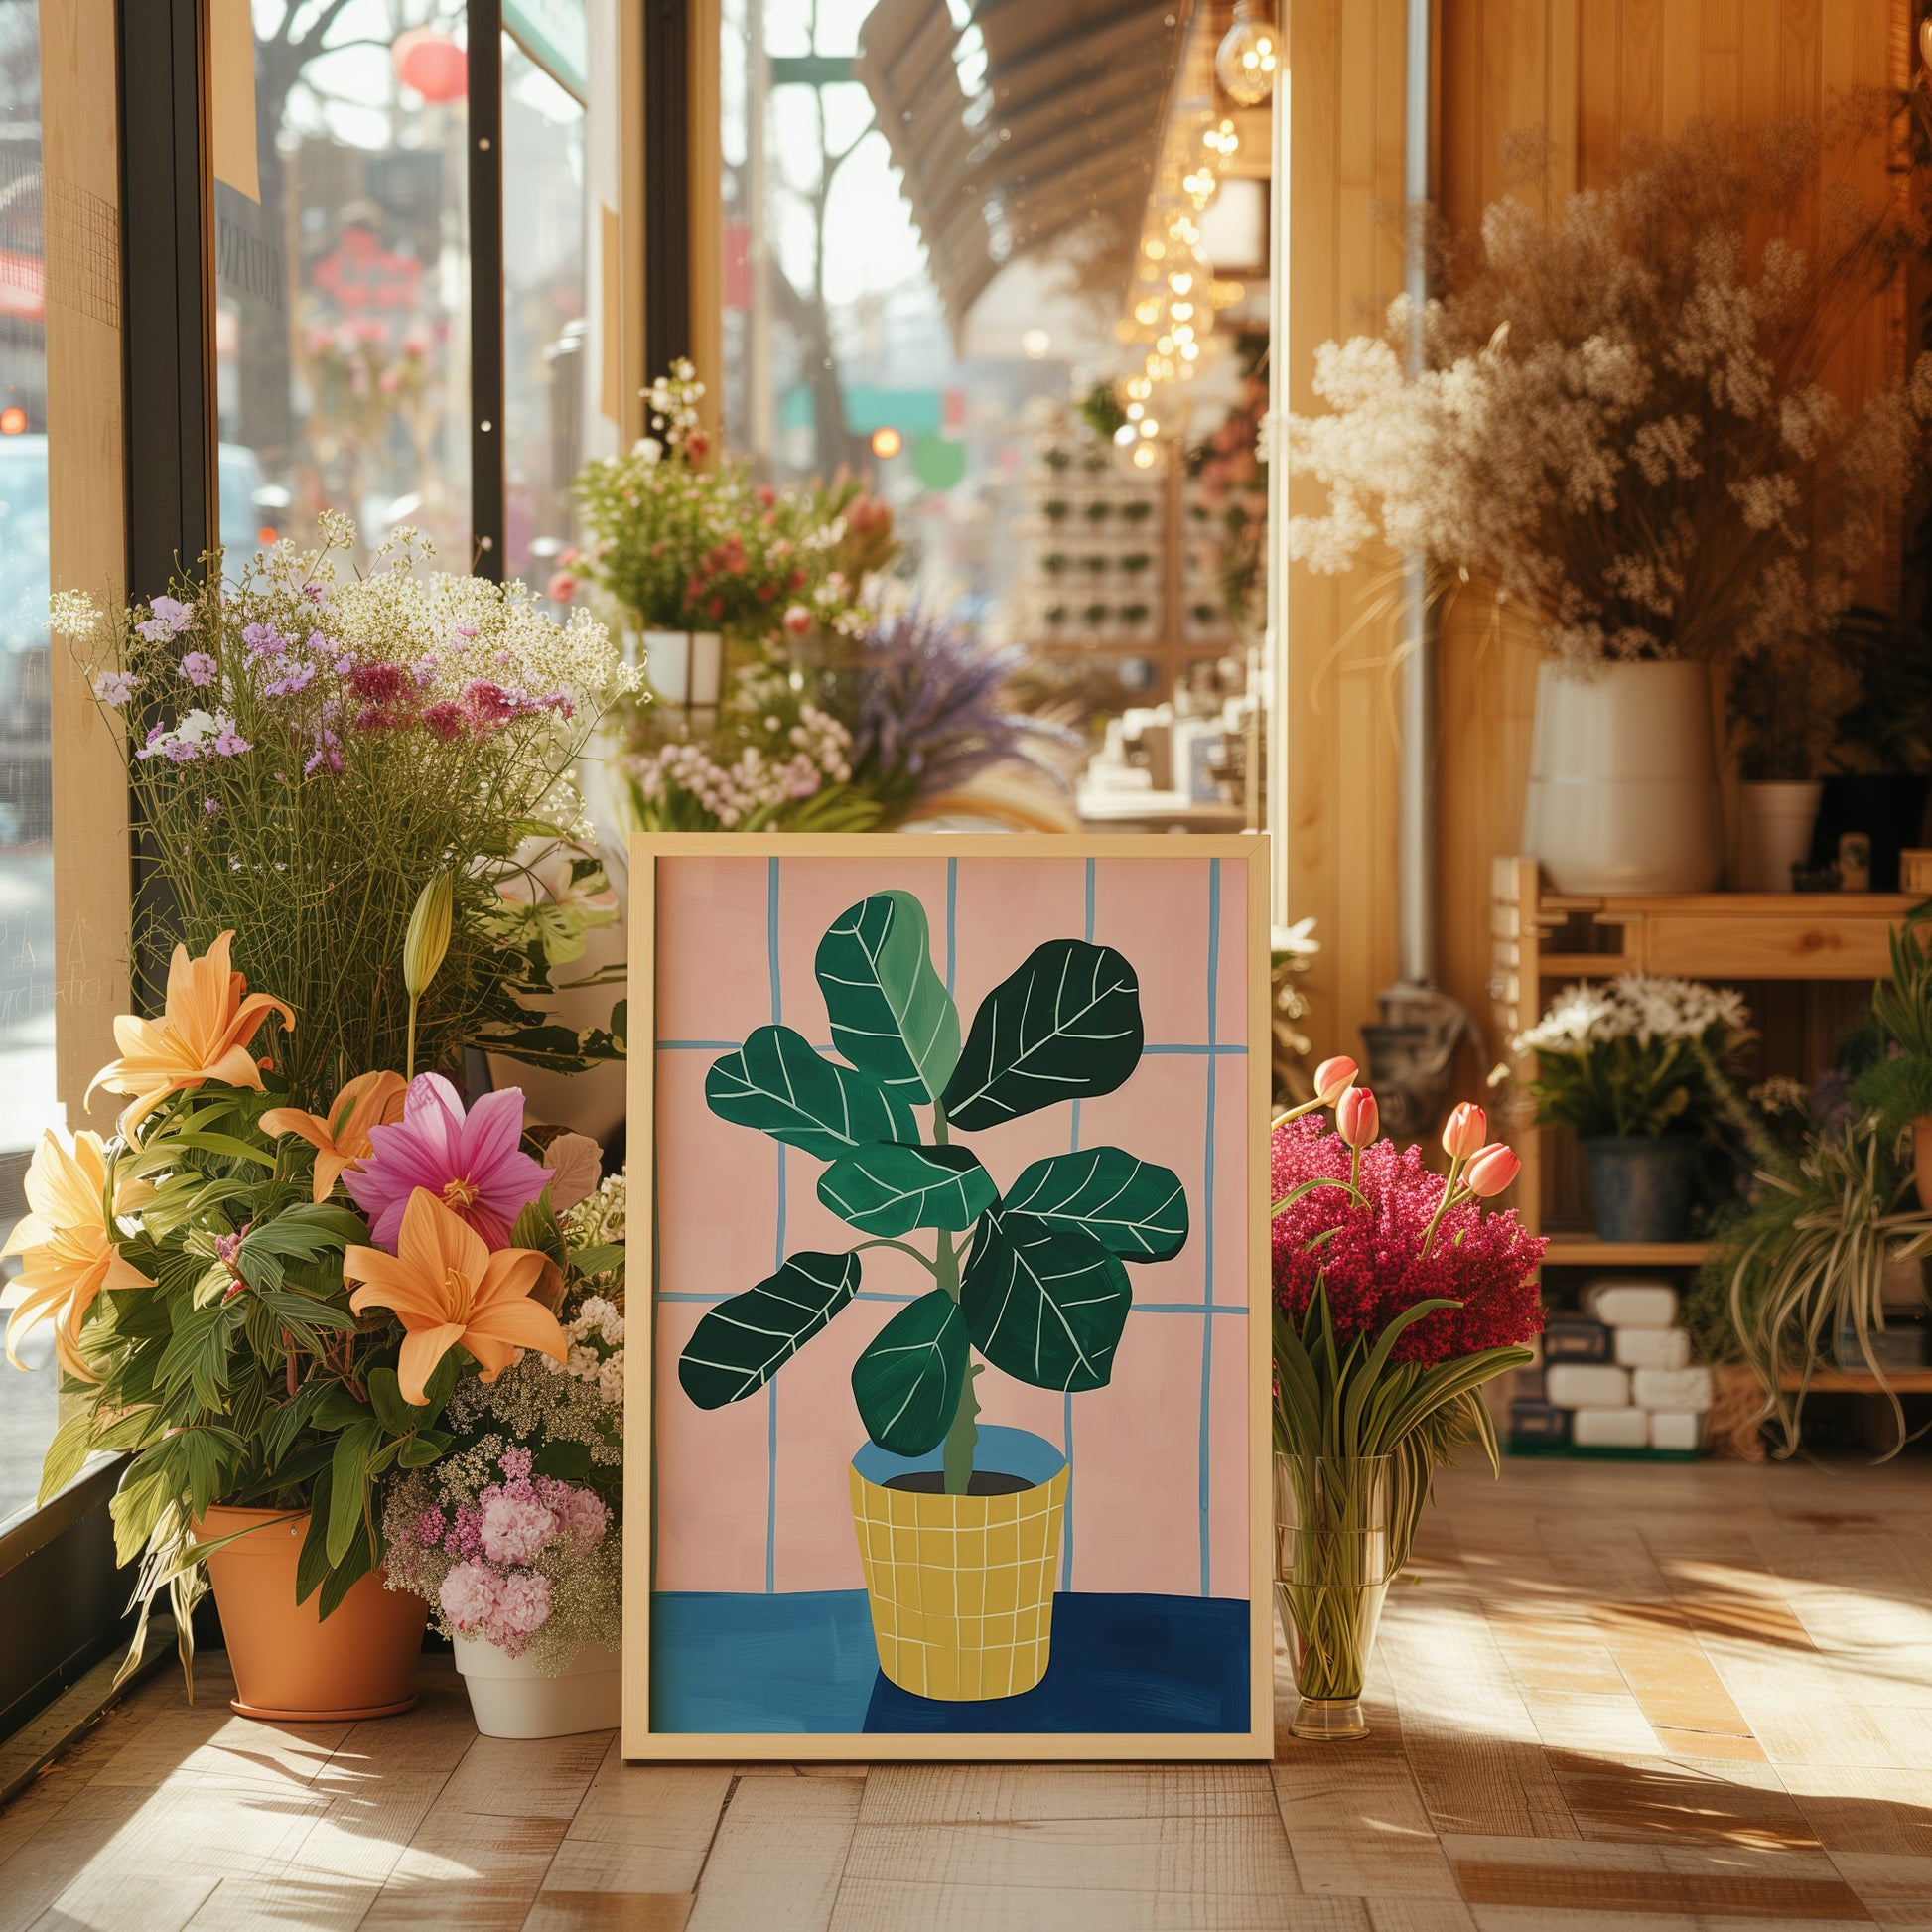 A bright and cozy flower shop interior with a large potted plant painting.